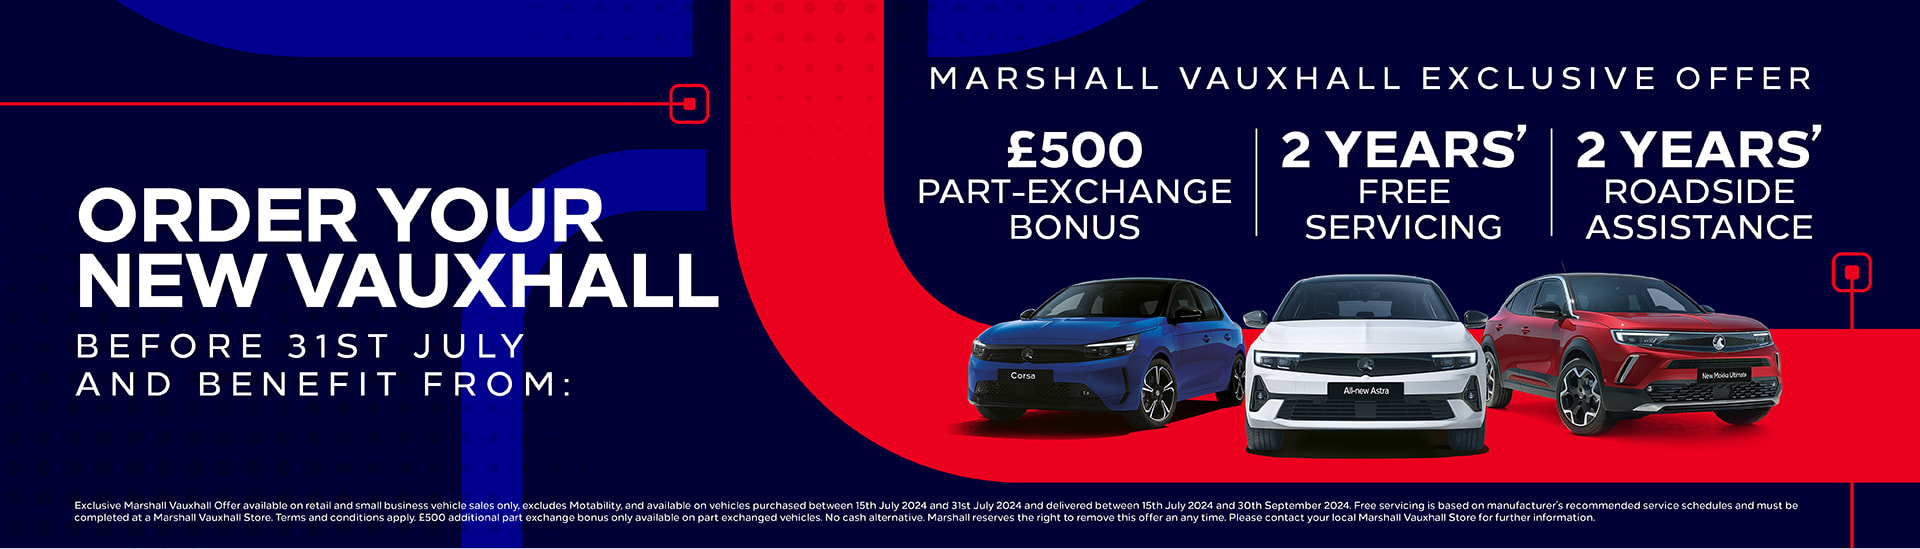 New Vauxhall Sales Campaign